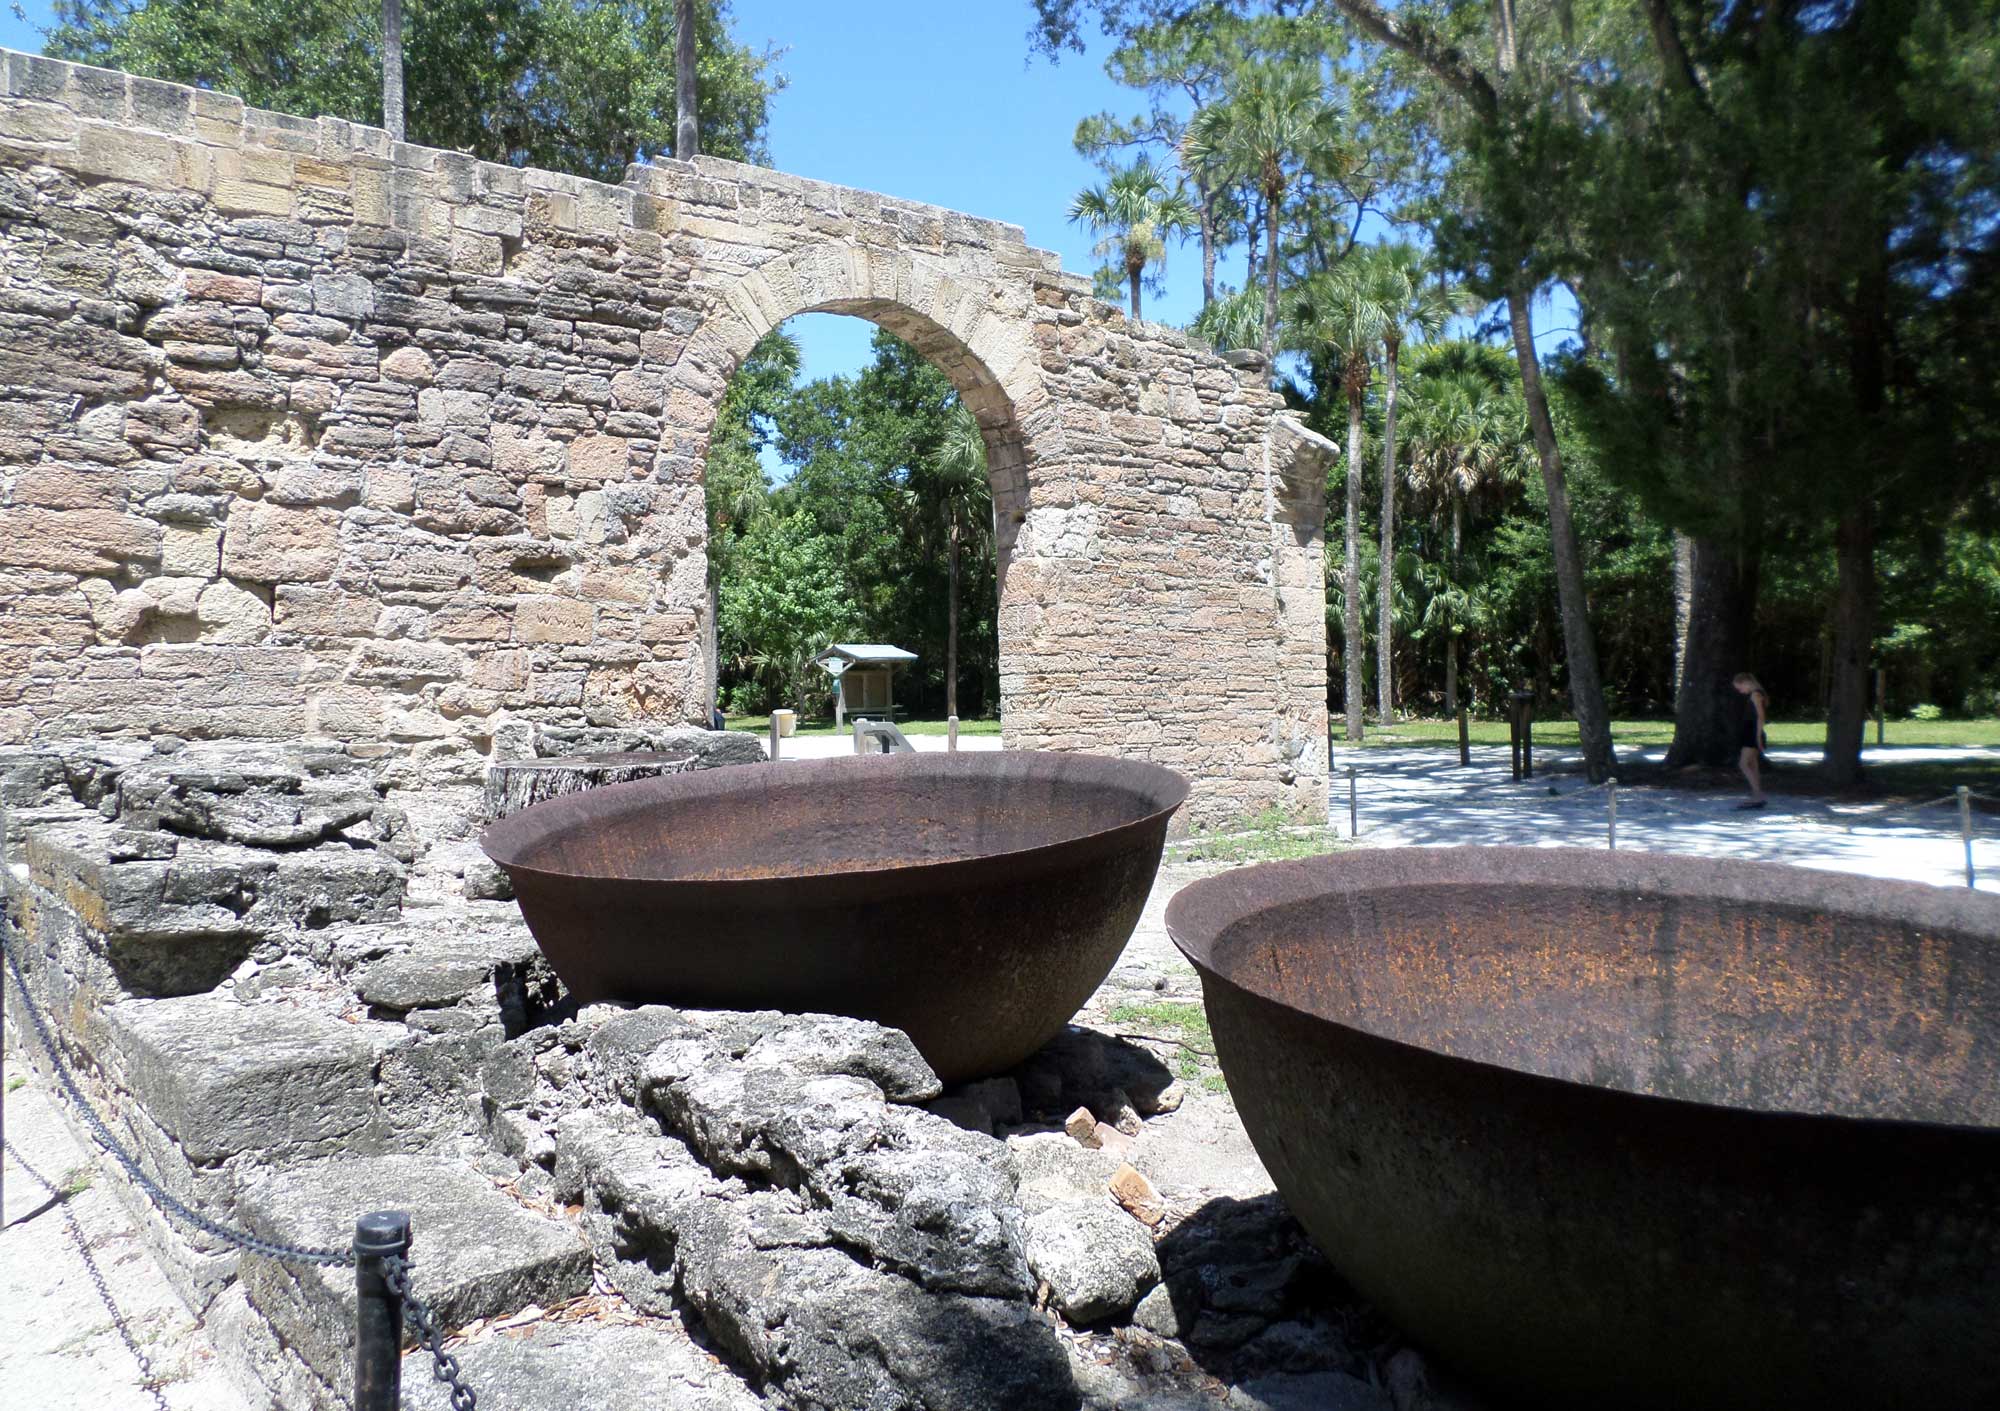 Photograph of the ruins of a sugar mill in New Smyrna Beach, Florida, dating to 1830 to 1835. The photo shows the partial wall of a stone building in the background, with two rounded kettles used for boiling sugarcane juice in the foreground. 